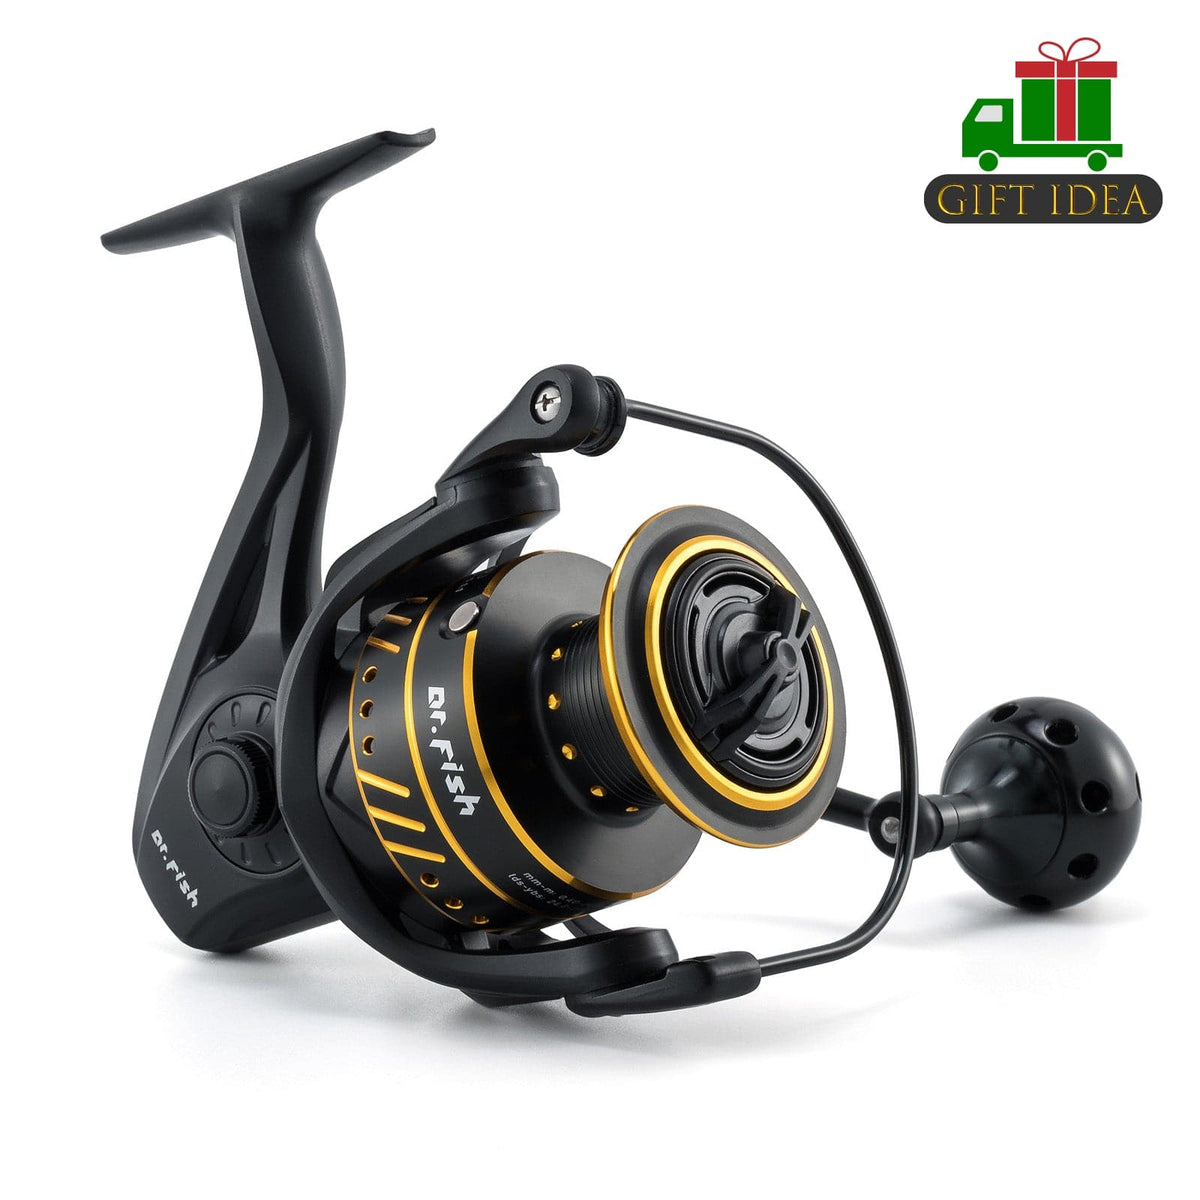 Fishing Spinning Reel 3000-6000 Good for Freshwater & Saltwater – Dr.Fish  Tackles